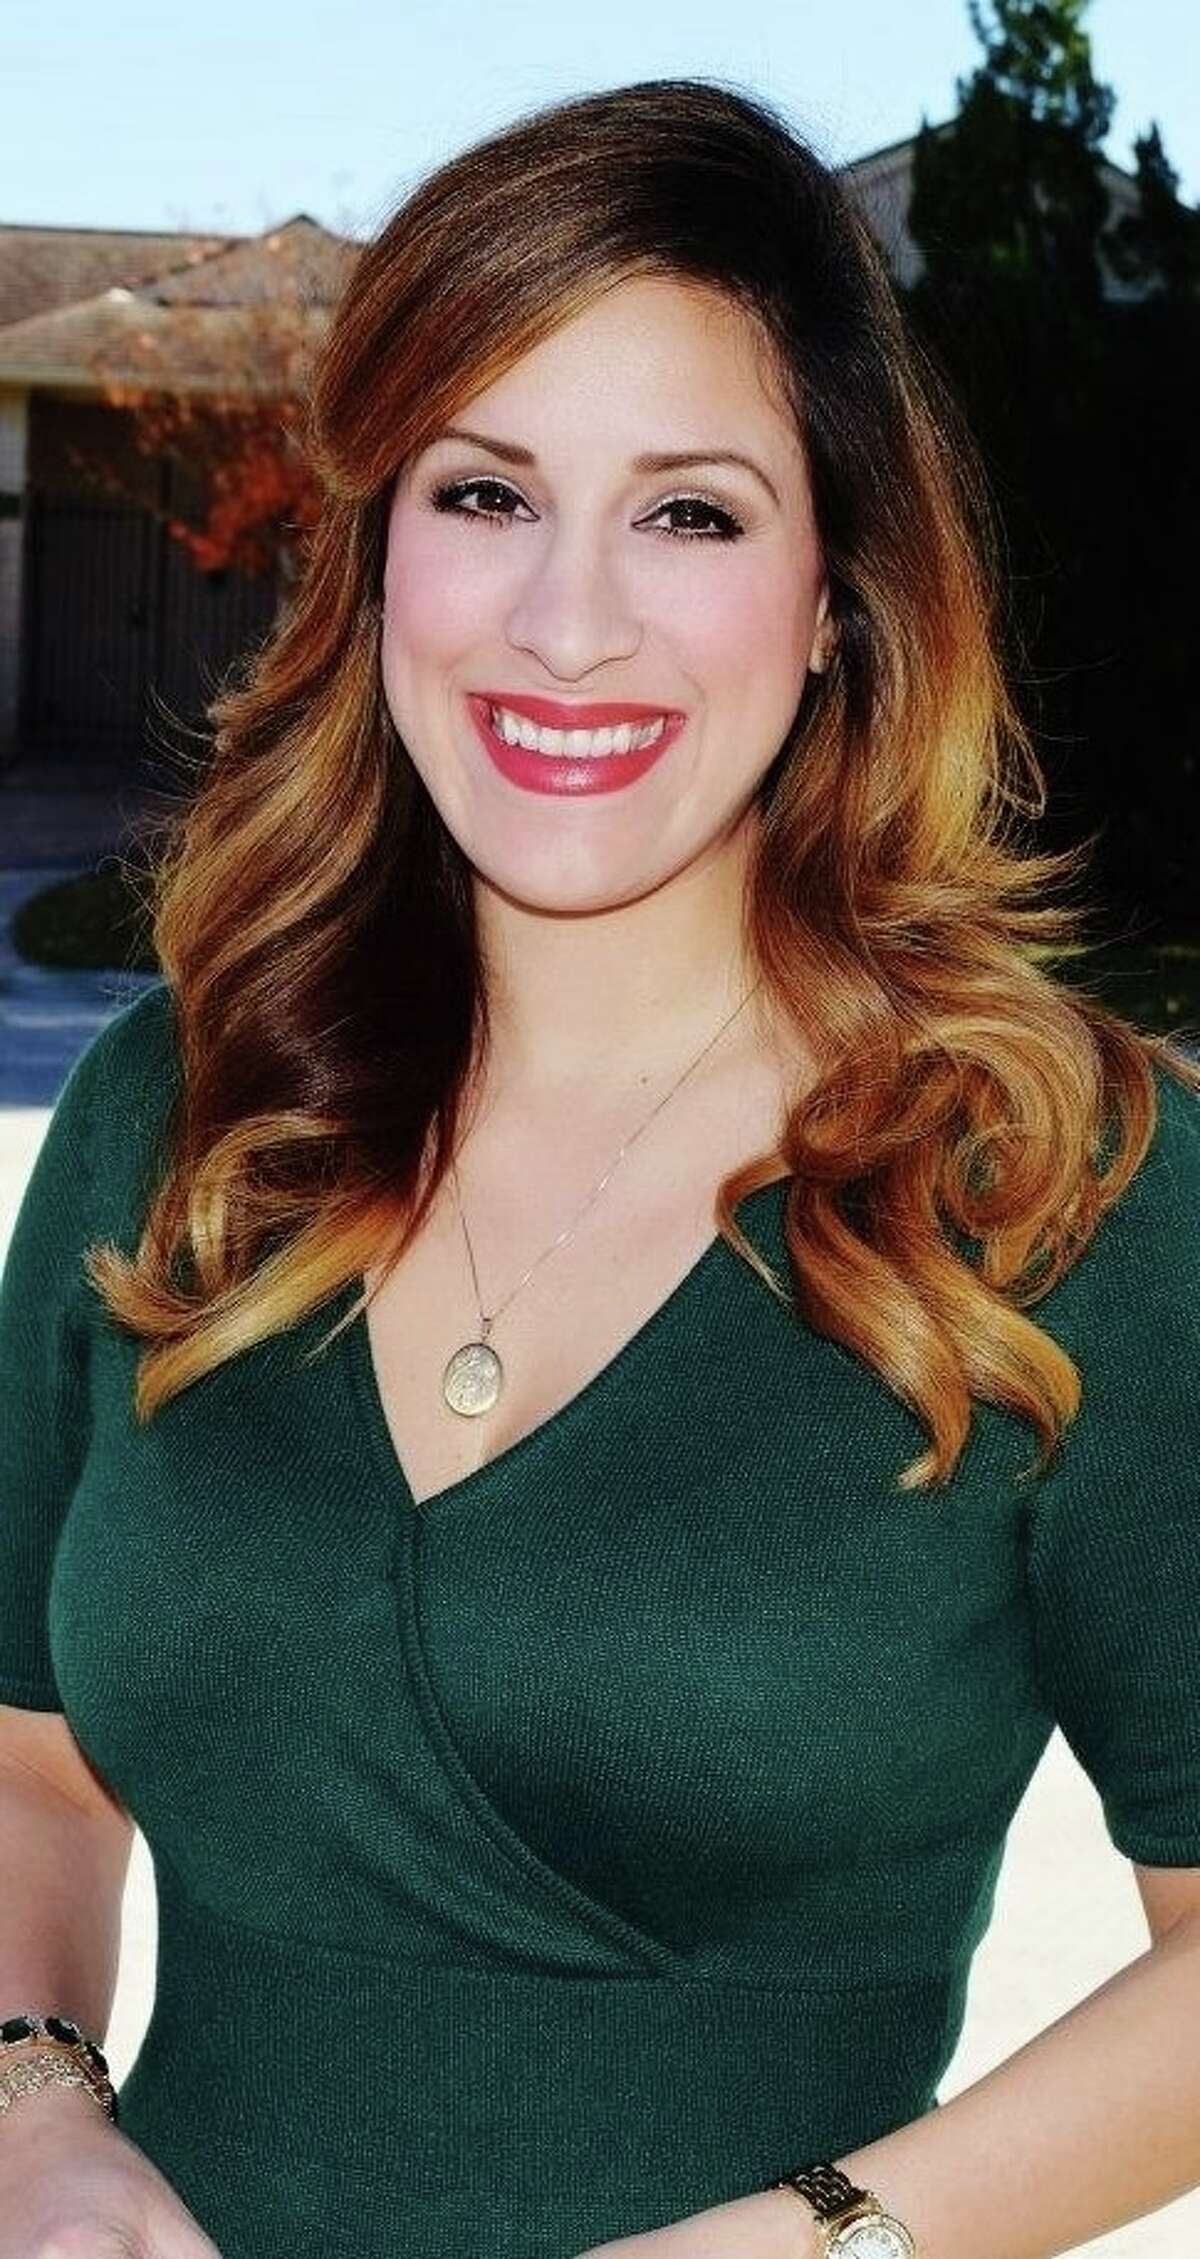 In mid-January 2015, KRIV-TV meteorologist Caitilin Espinosa announced she was leaving Fox 26 News after two years on the weather wall. She cited bad health and a chance to work on her YouTube channel. In late October that same year, Espinosa revealed she was the new public information officer for the Fort Bend County Sheriff's Office.